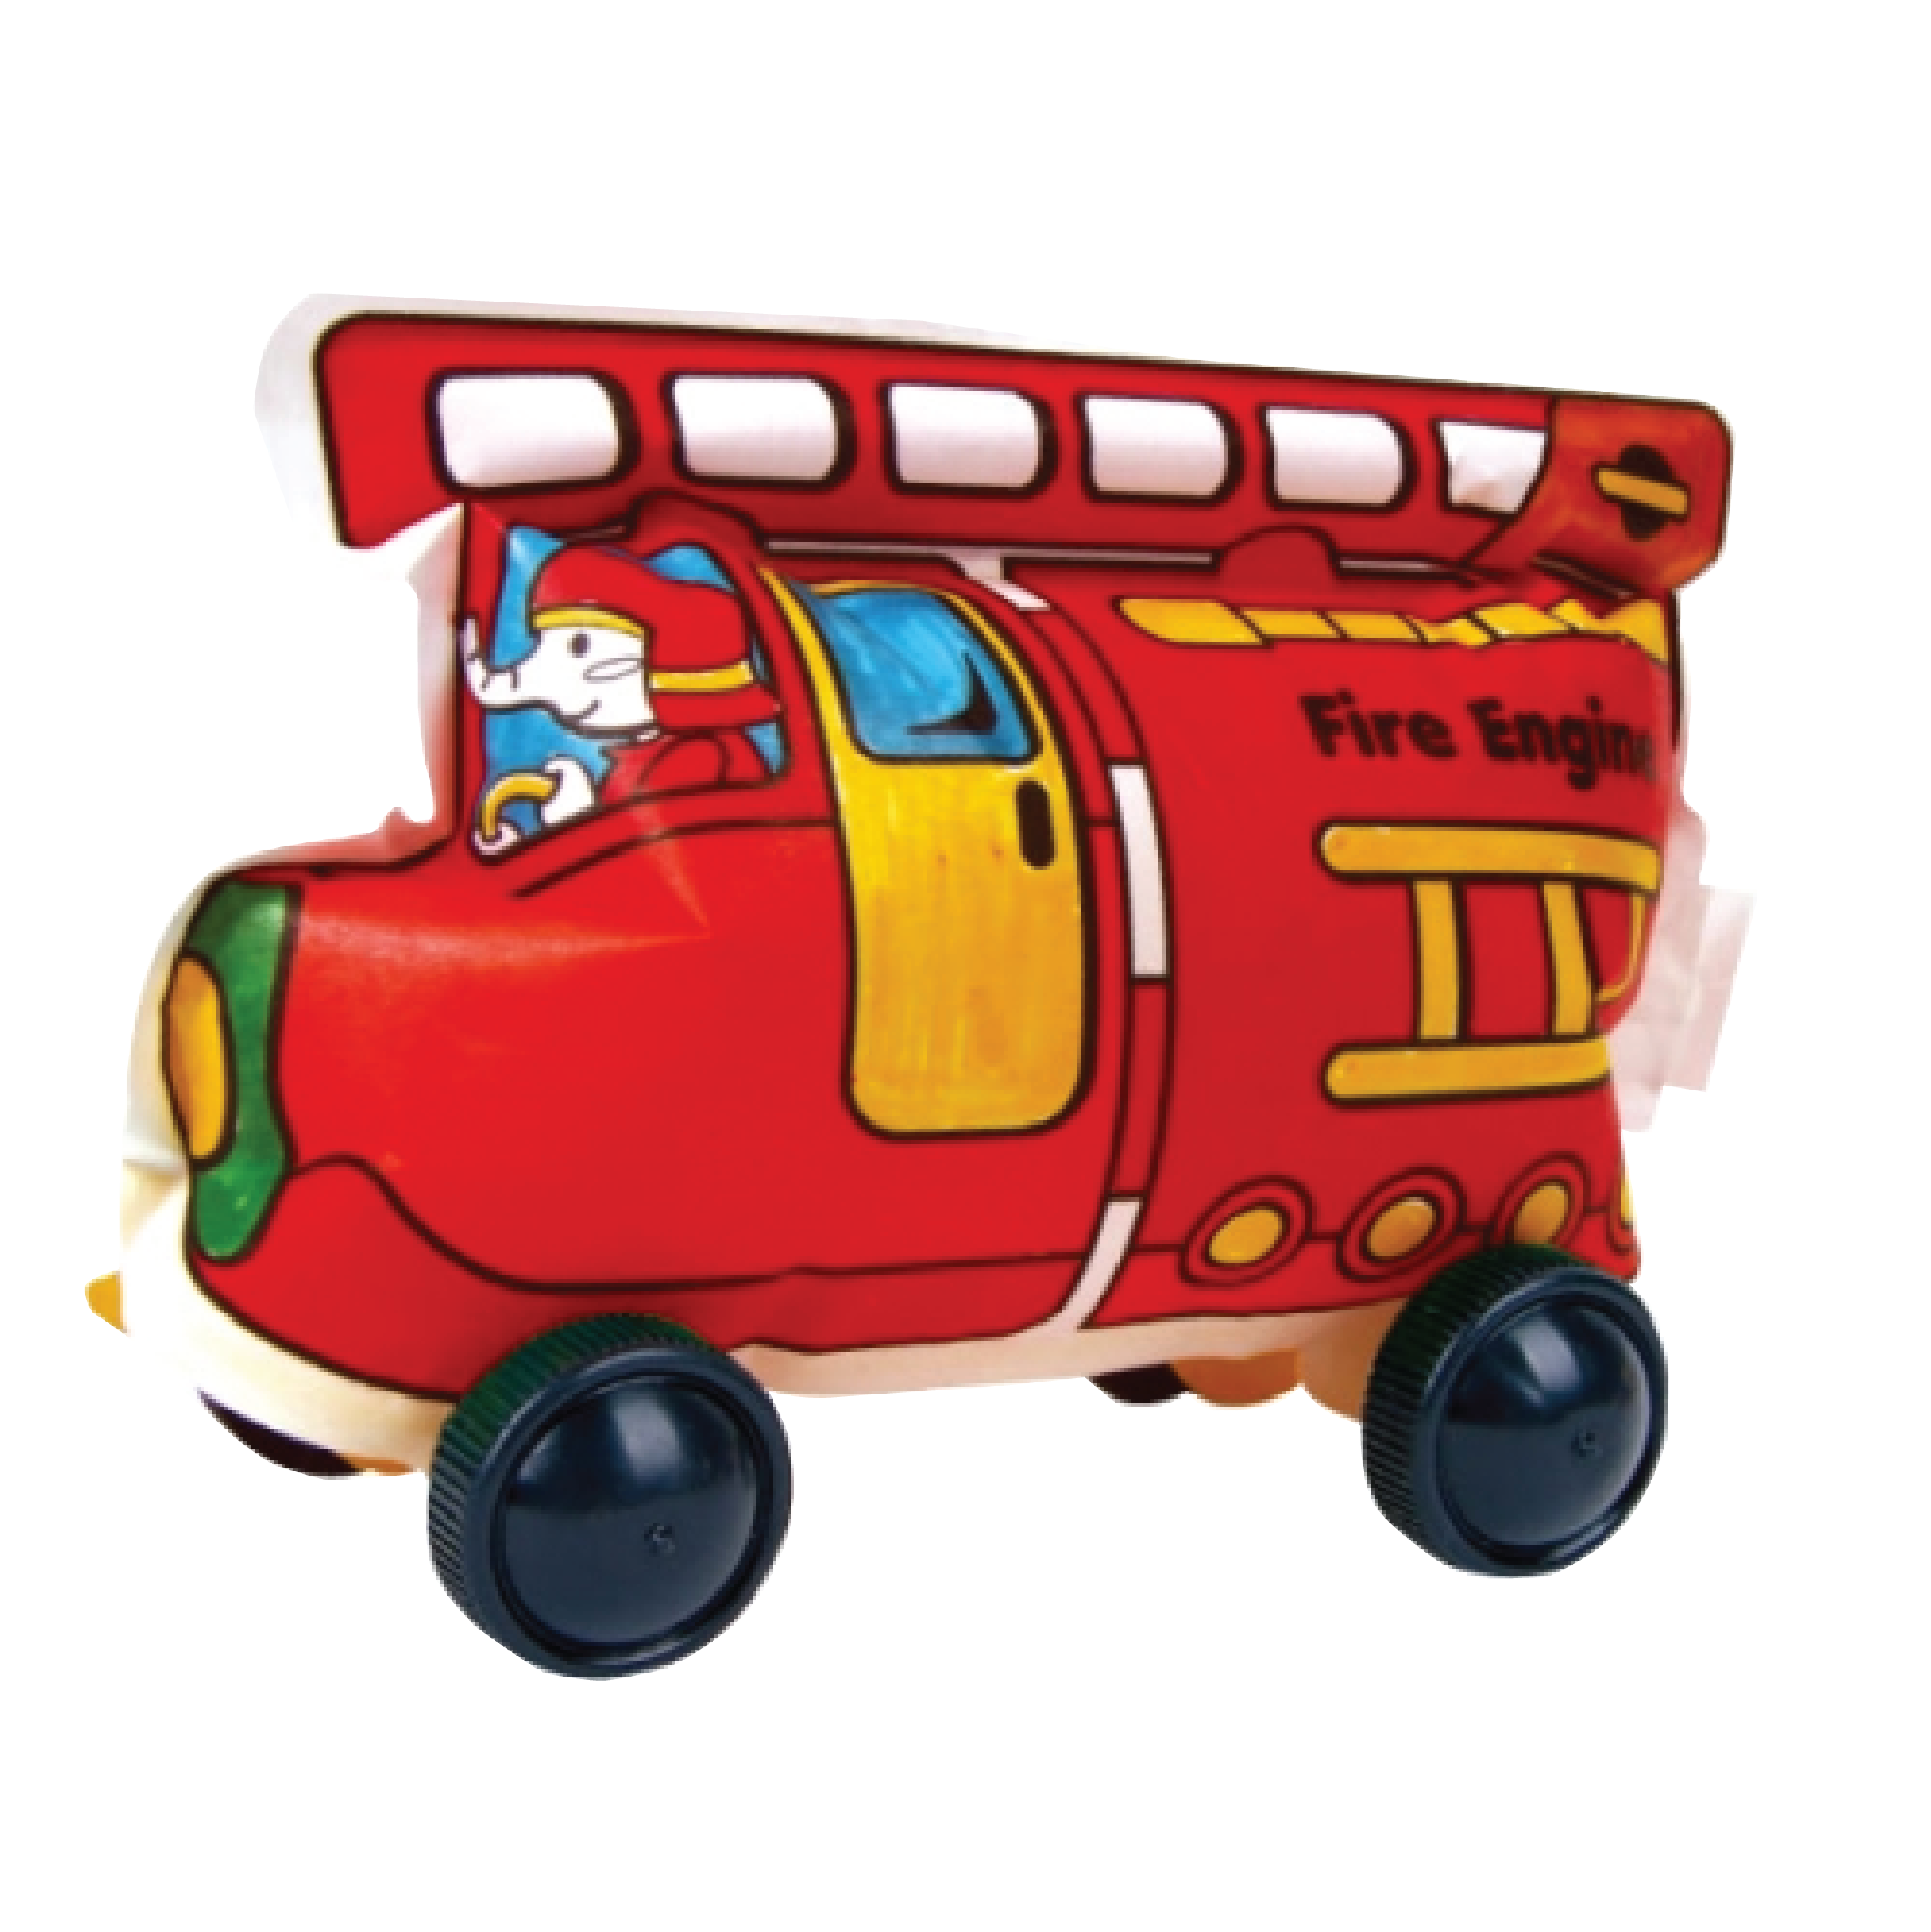 Colorloon Design N Inflate Vehicle Series - Fire Engine